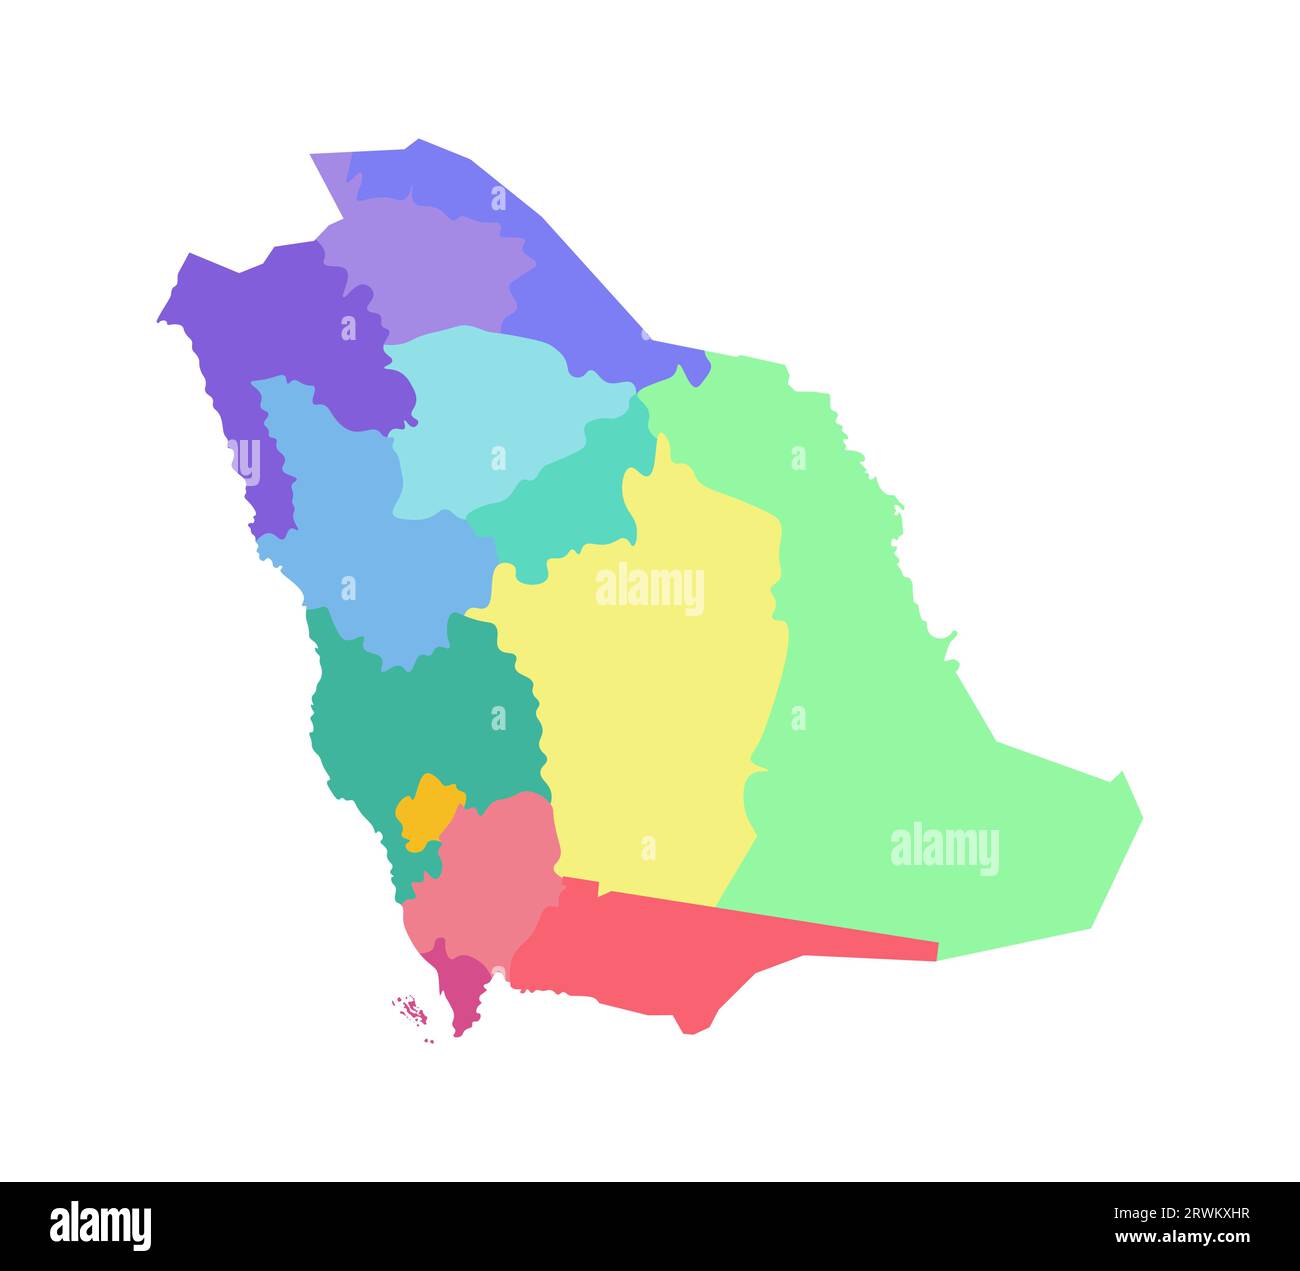 Vector isolated illustration of simplified administrative map of Saudi Arabia. Borders of the regions. Multi colored silhouettes. Stock Vector